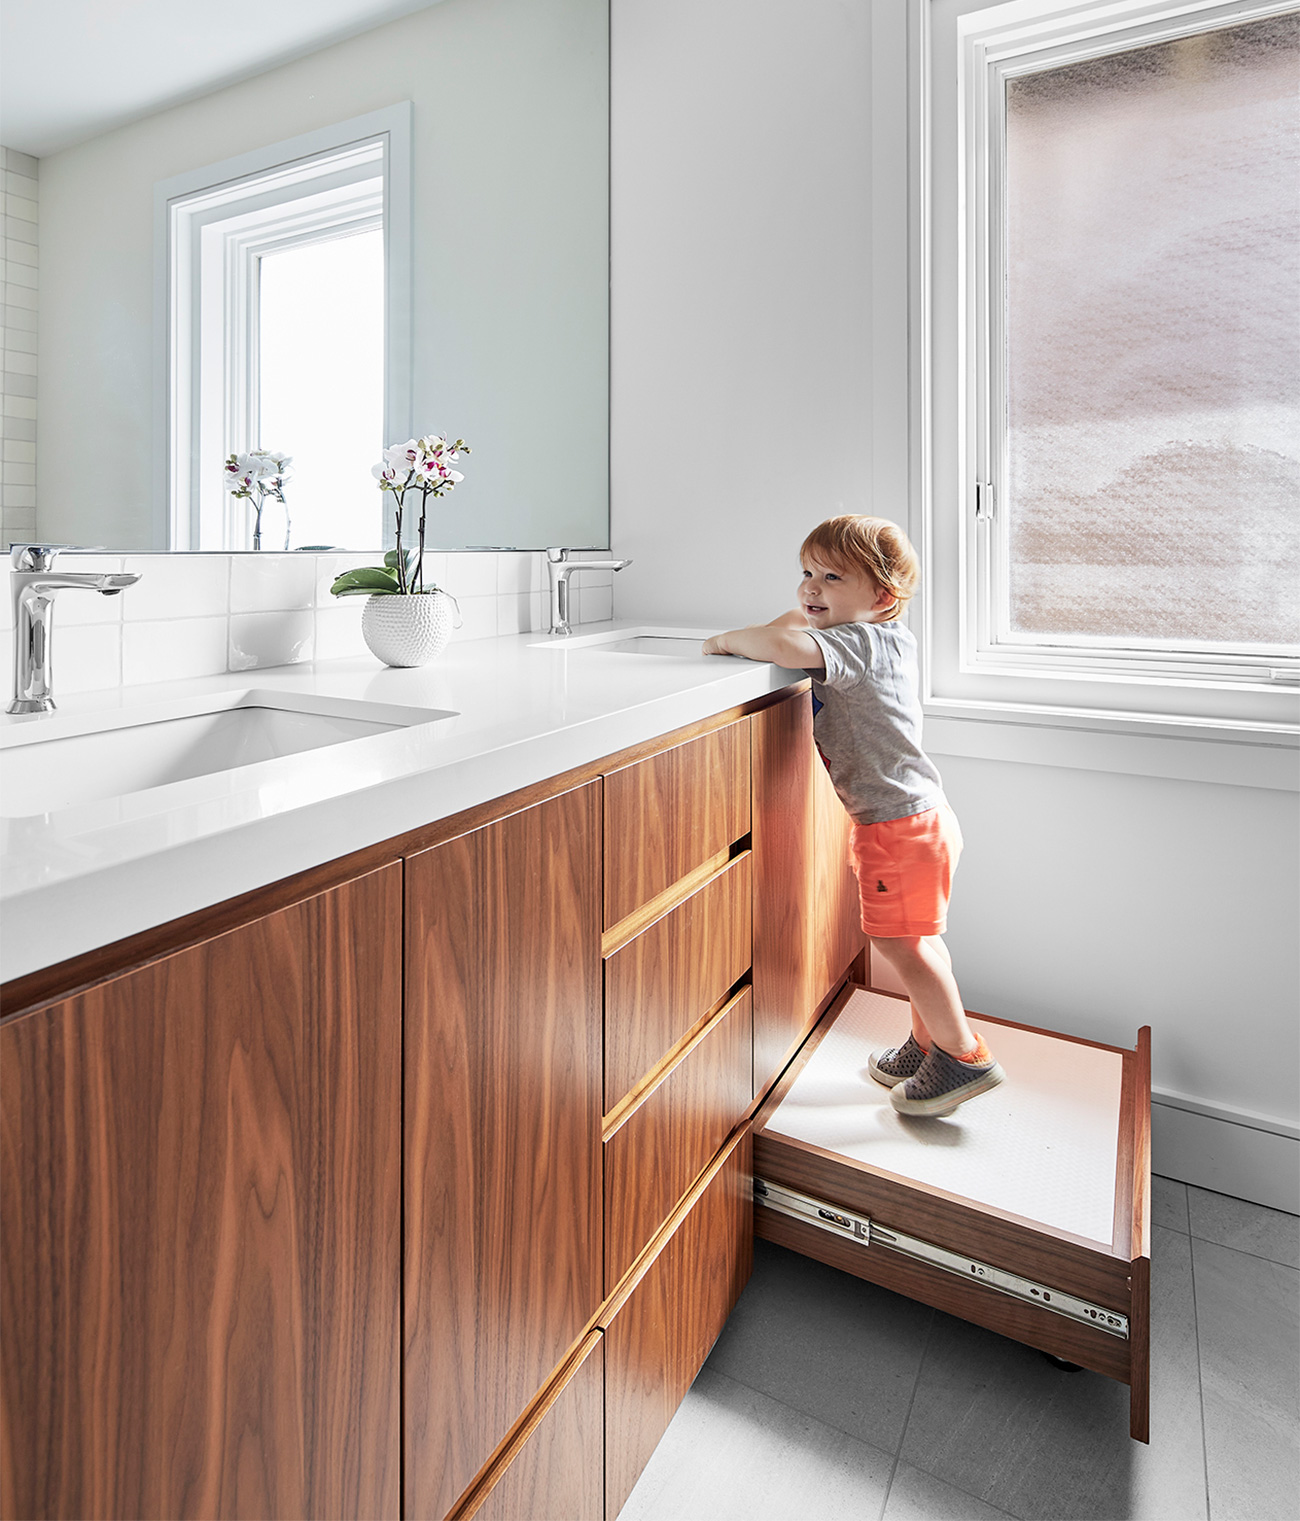 Because the homeowners are frequently visited by the grandkids, Myers updated a family bathroom, complete with stowable step stool. Walnut cabinetry and custom vanity by Millworx; Artemide sconces.